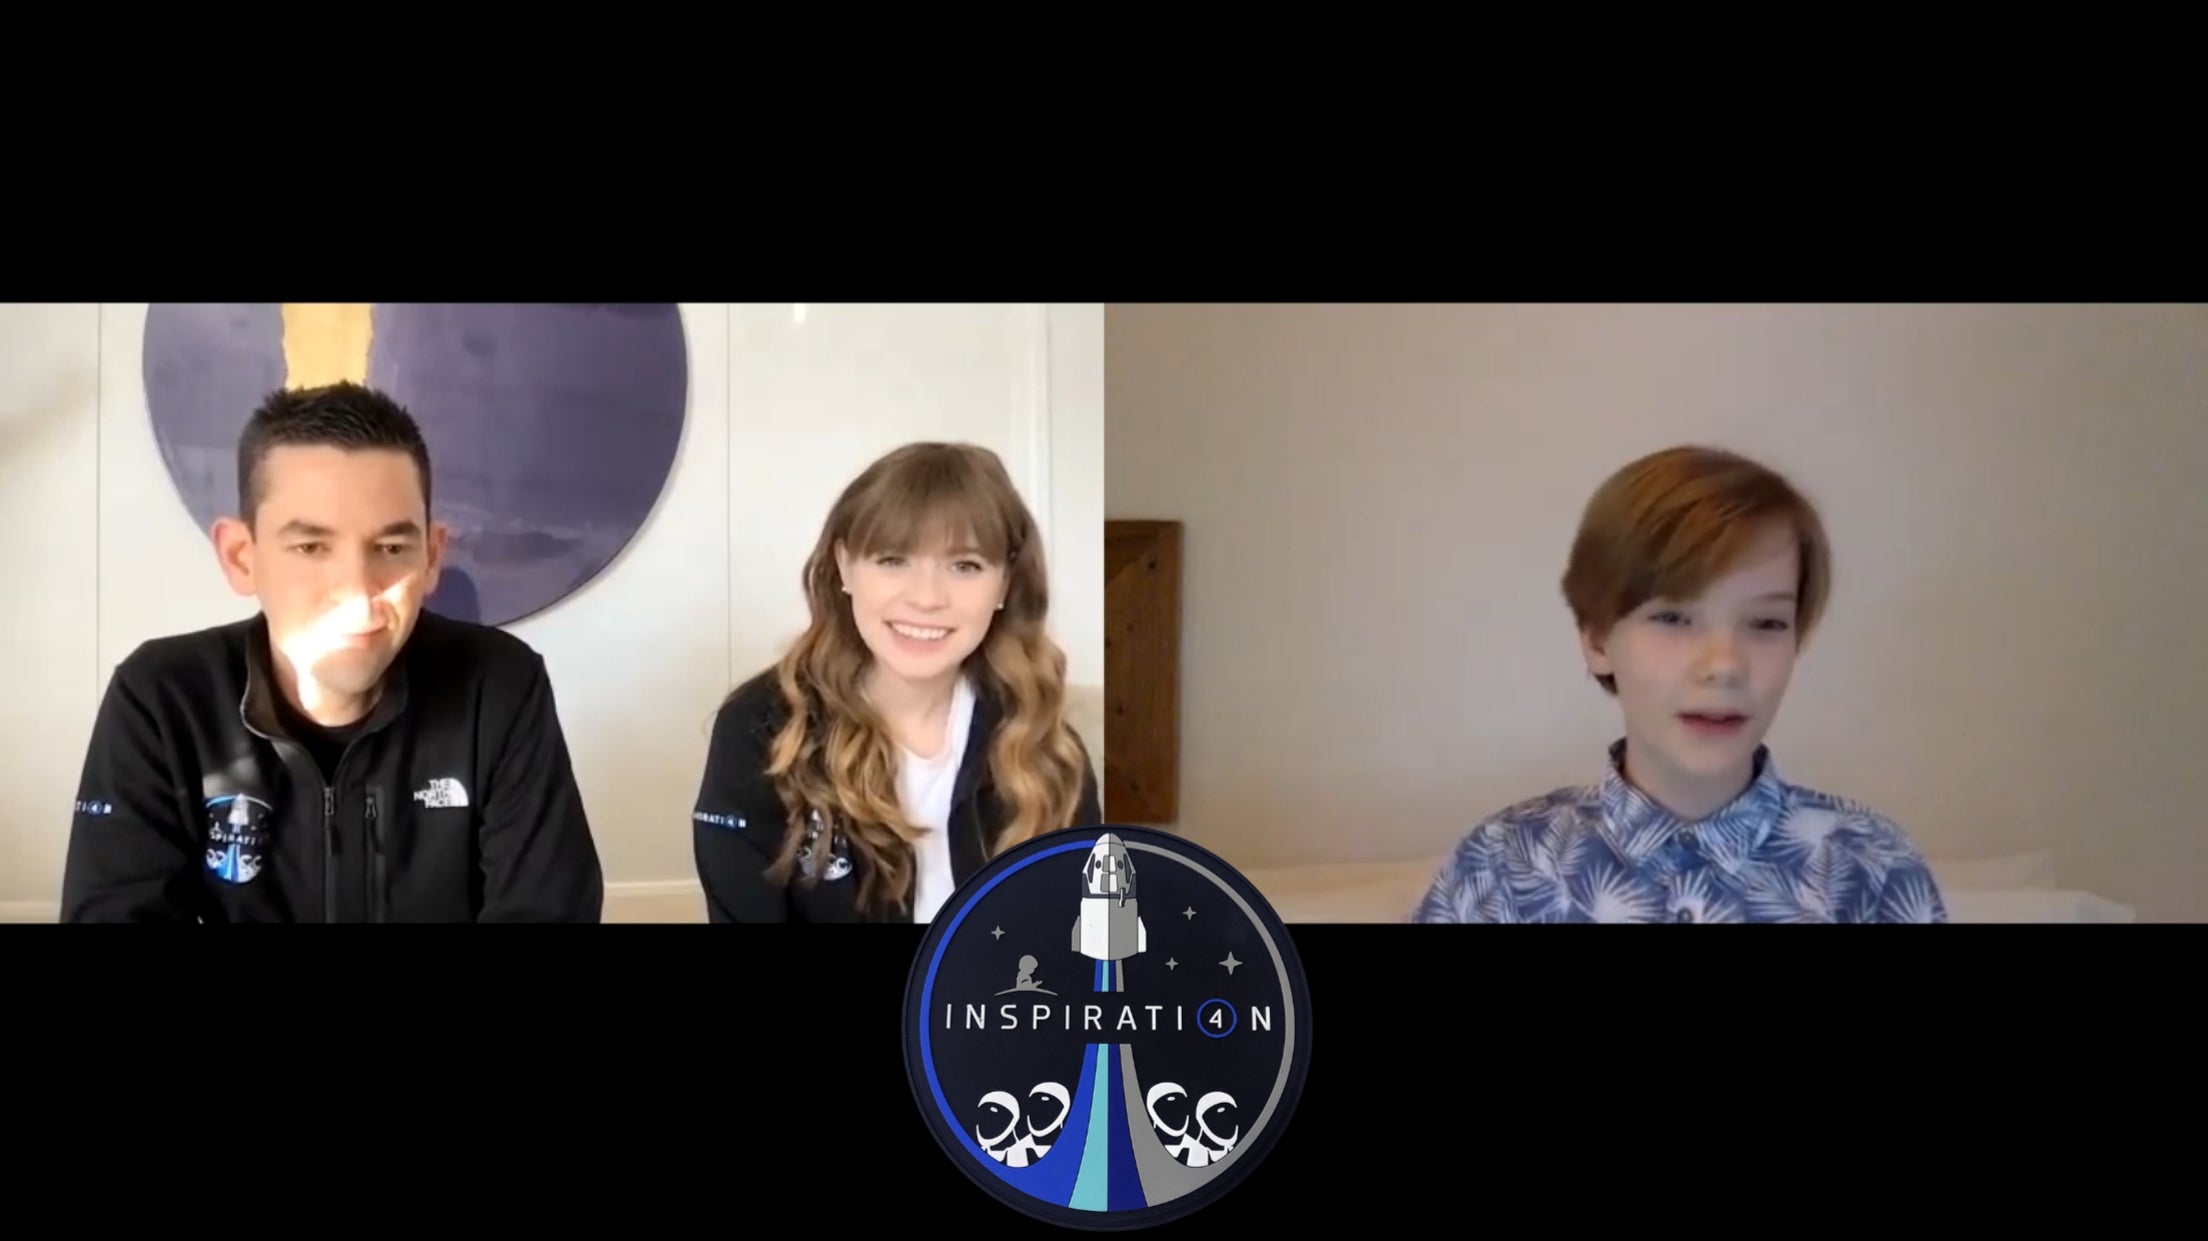 Teenager Interviews SpaceX Inspiration4 Crew Members [VIDEO]